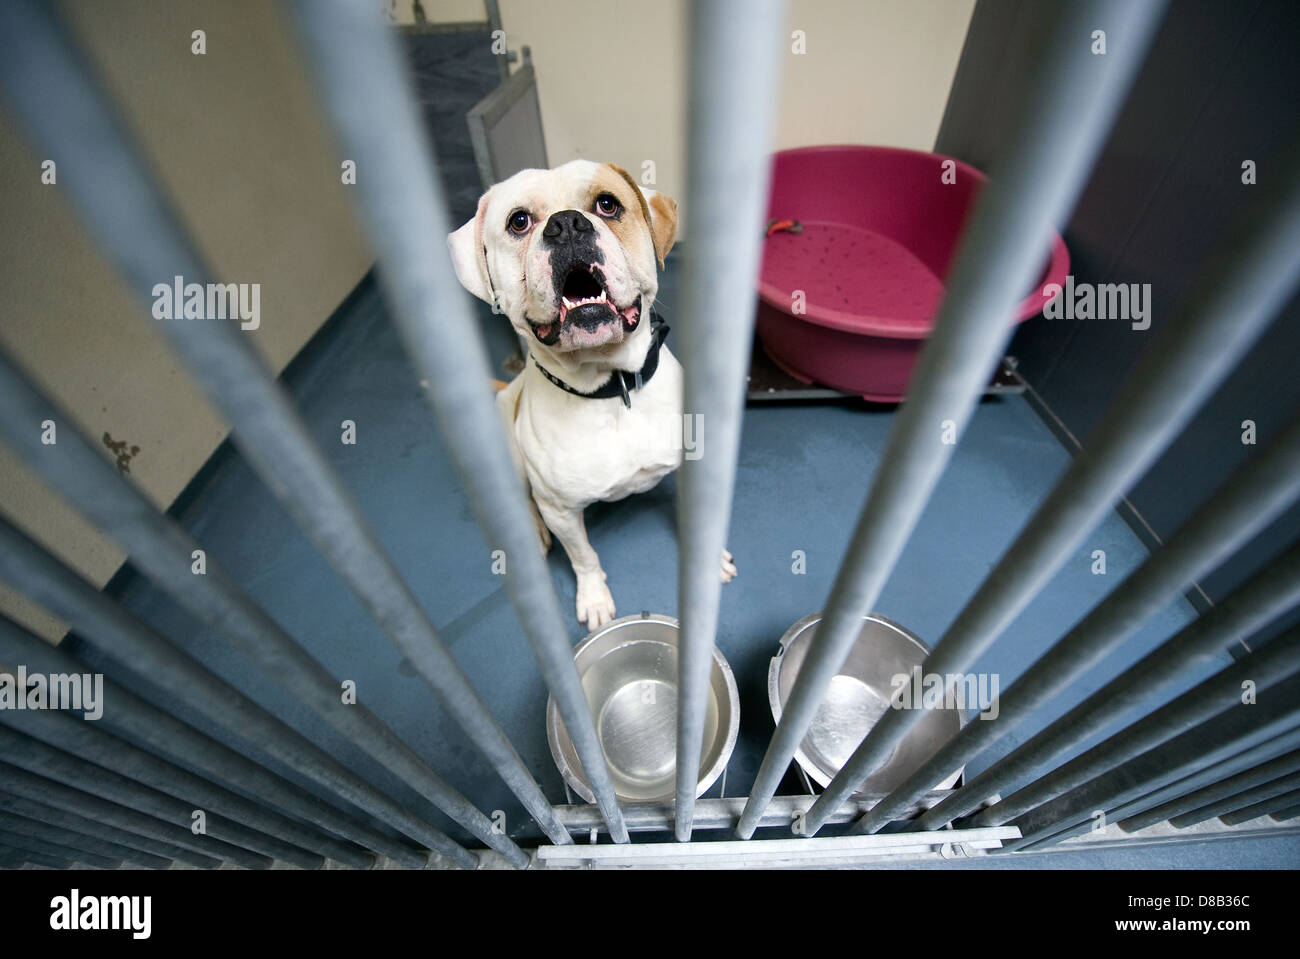 Homeless dog behind bars in an animal shelter Stock Photo - Alamy